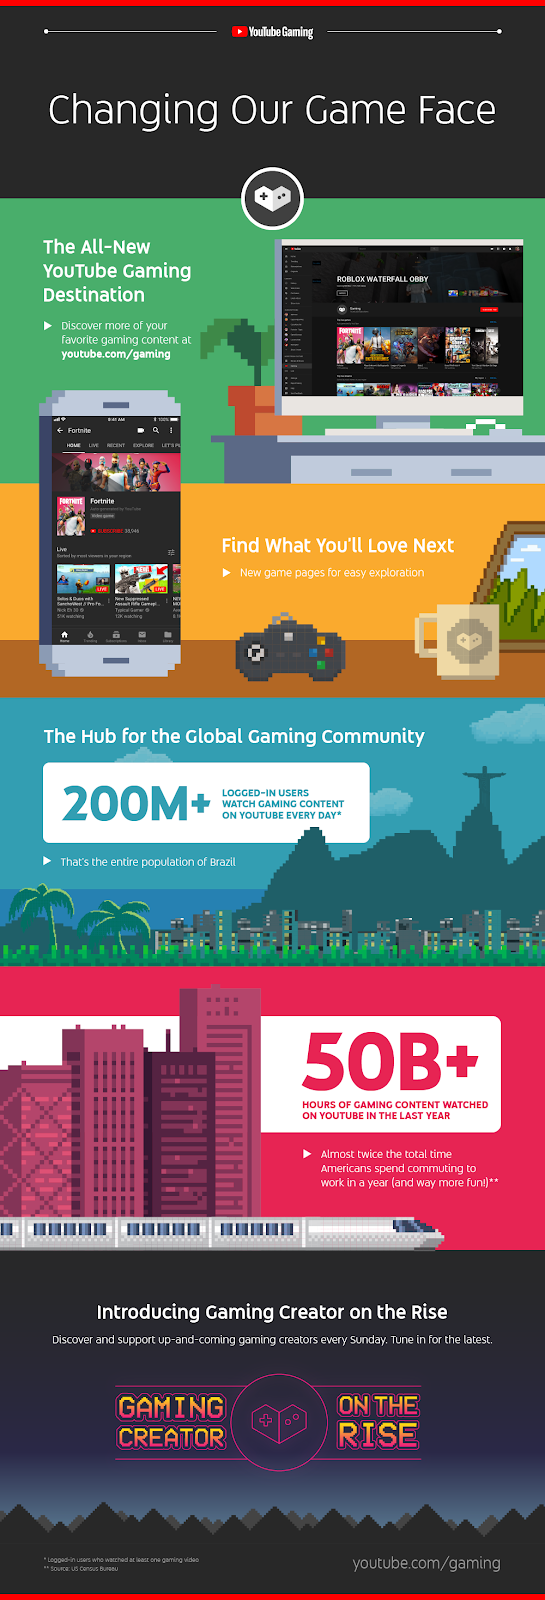 [email protected] Launches a New YouTube Channel for Independent Gaming YT_Gaming_Infographic_17Sept_EN-US.png